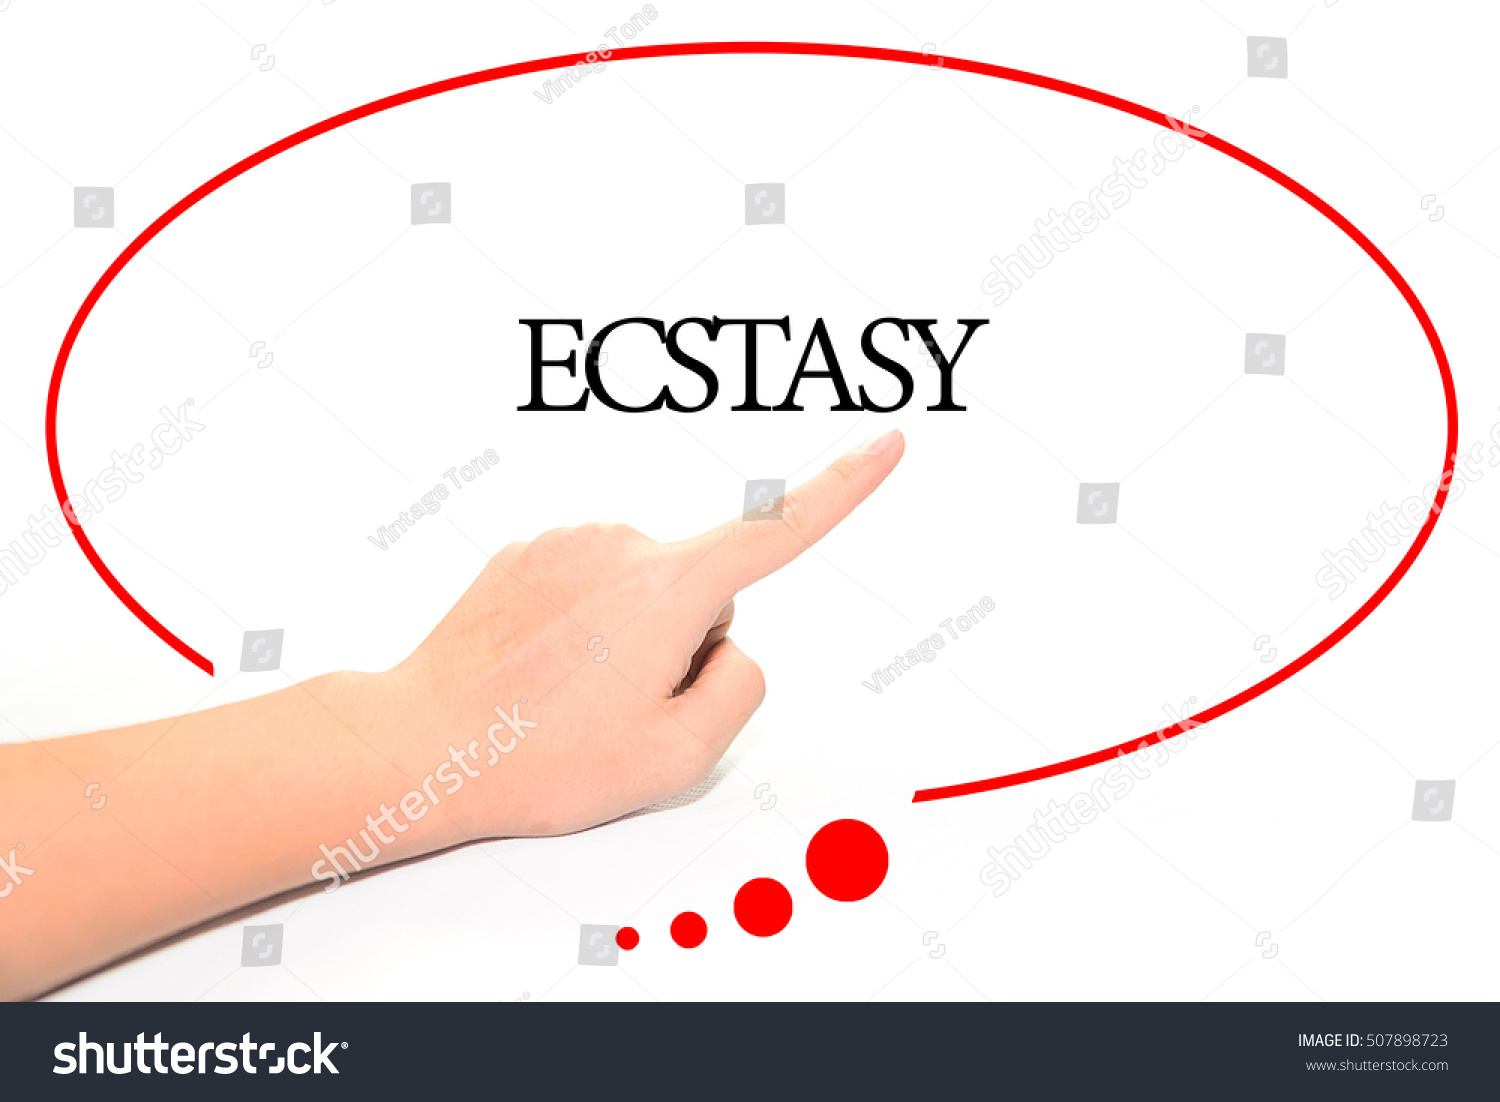 Ecstacy meaning